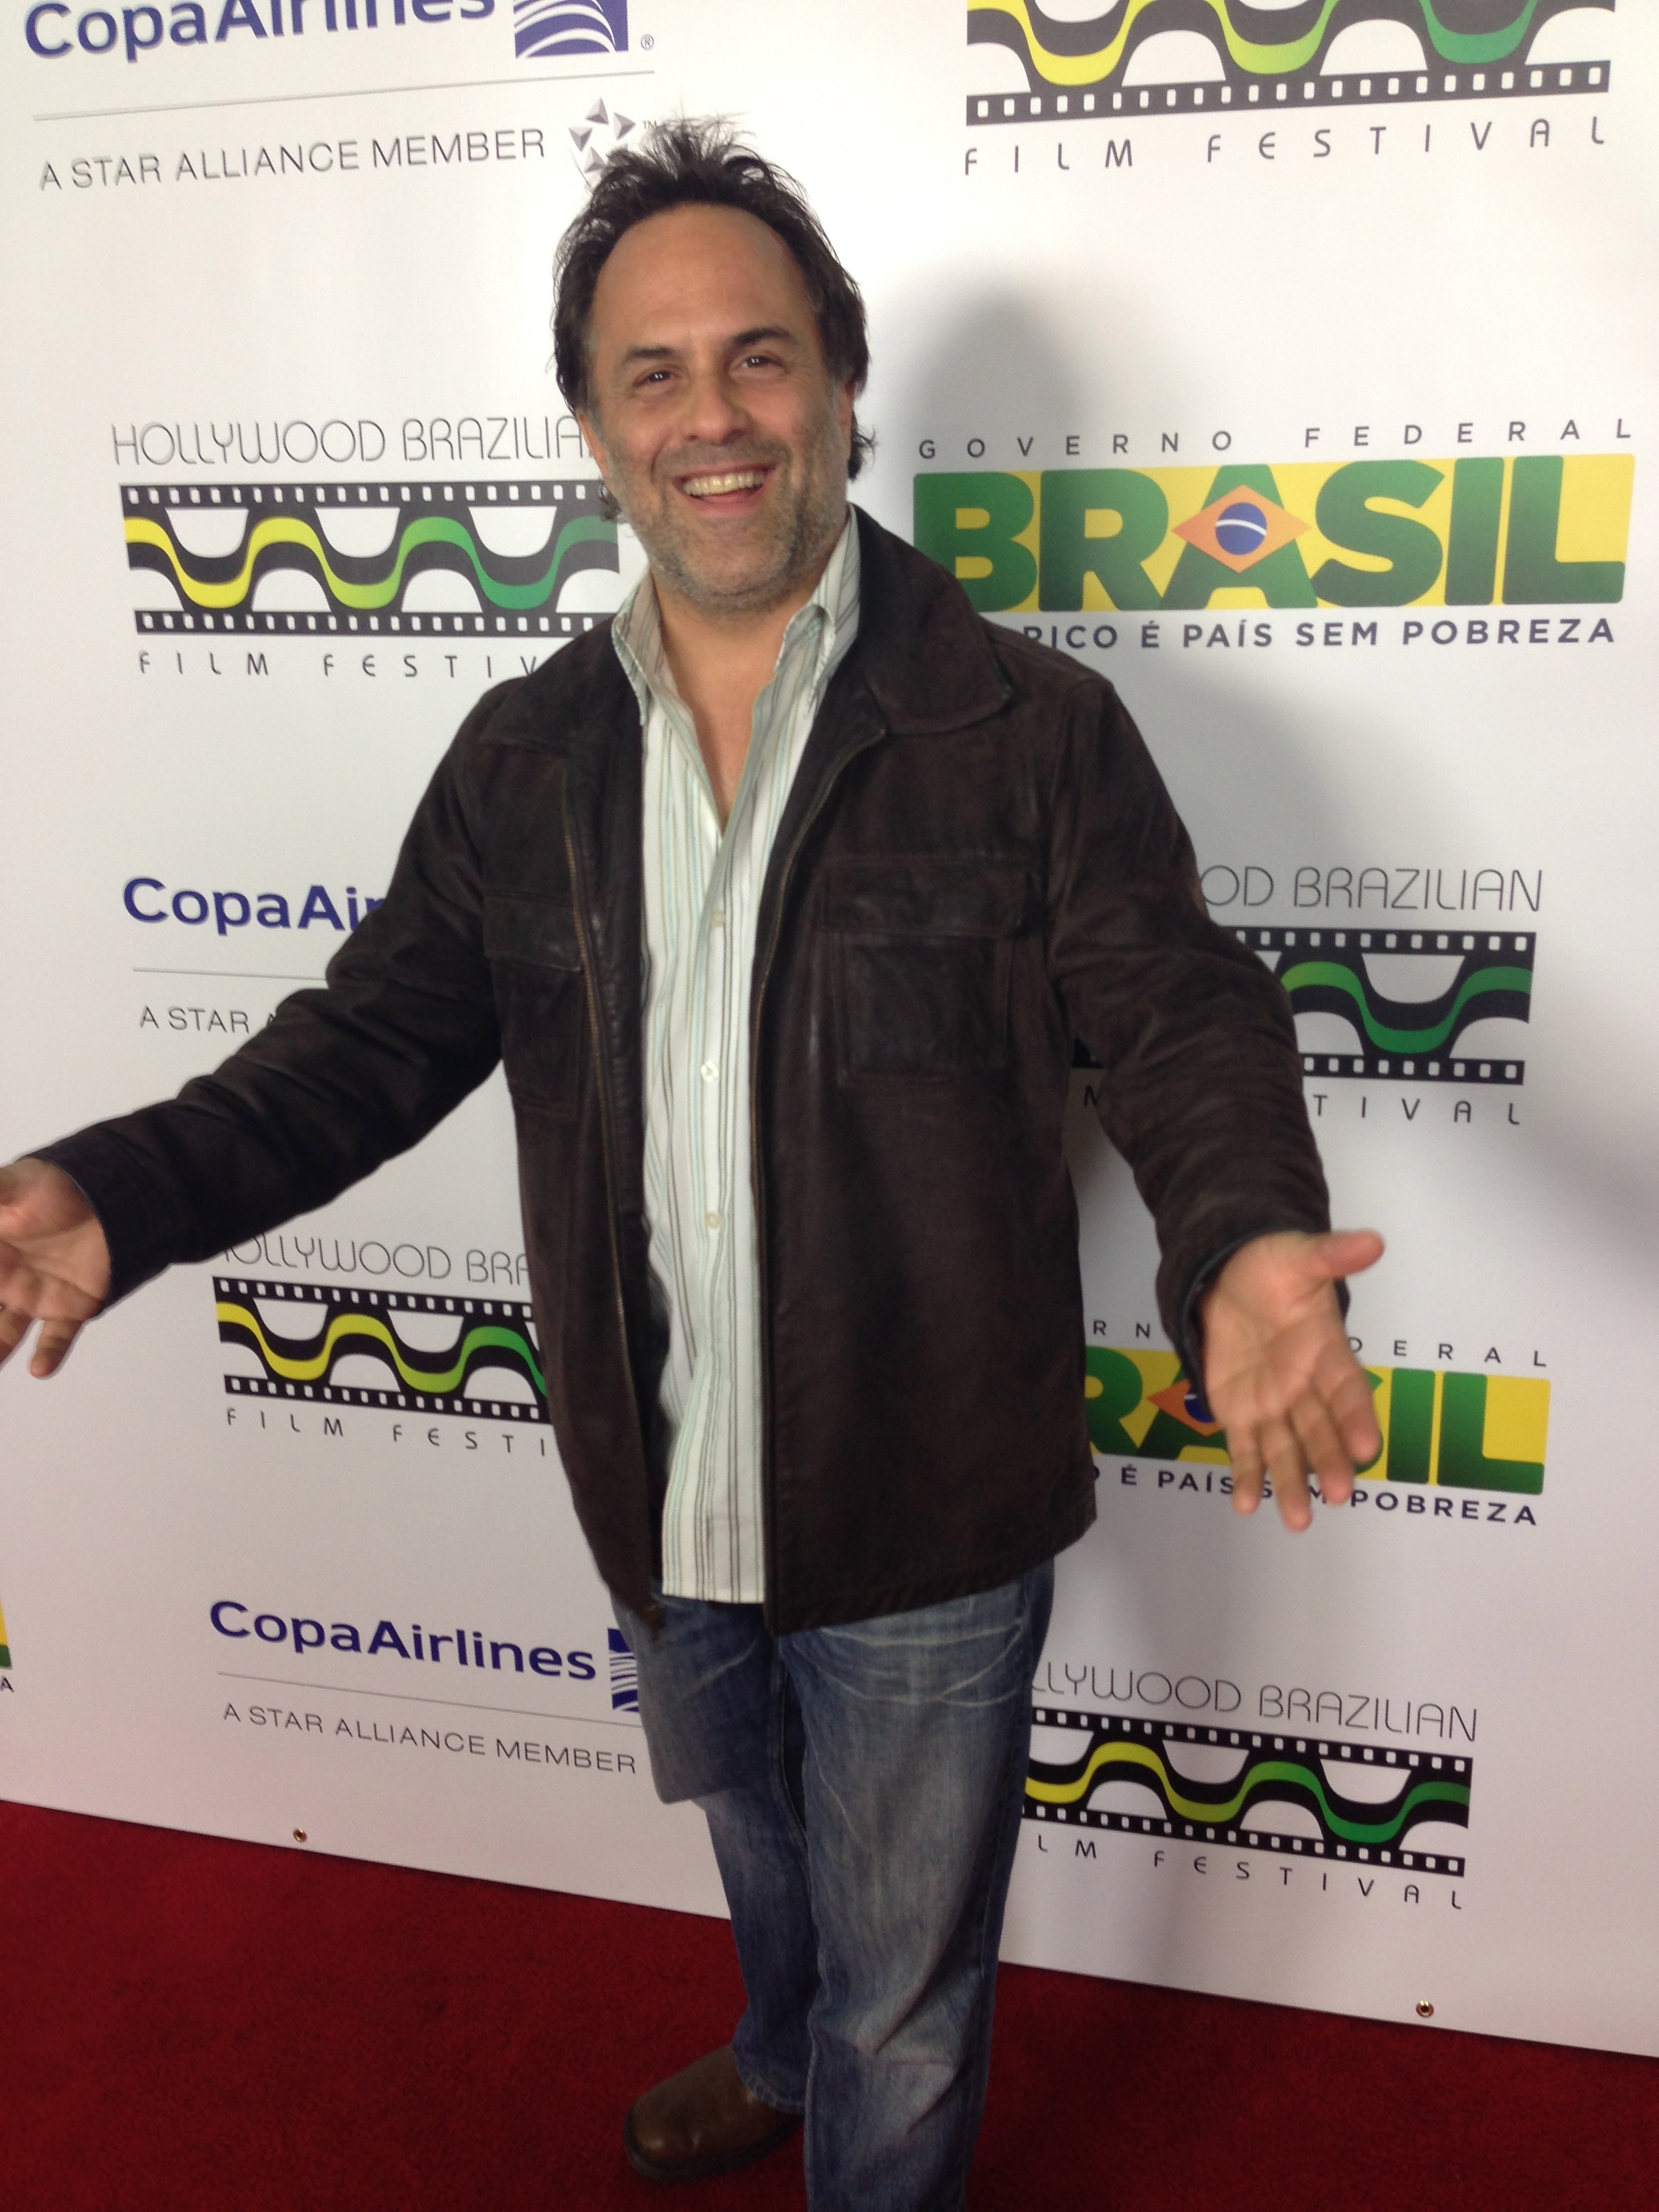 Opening Night for the 6th Annual Hollywood Brazilian Film Festival. Nov 2014